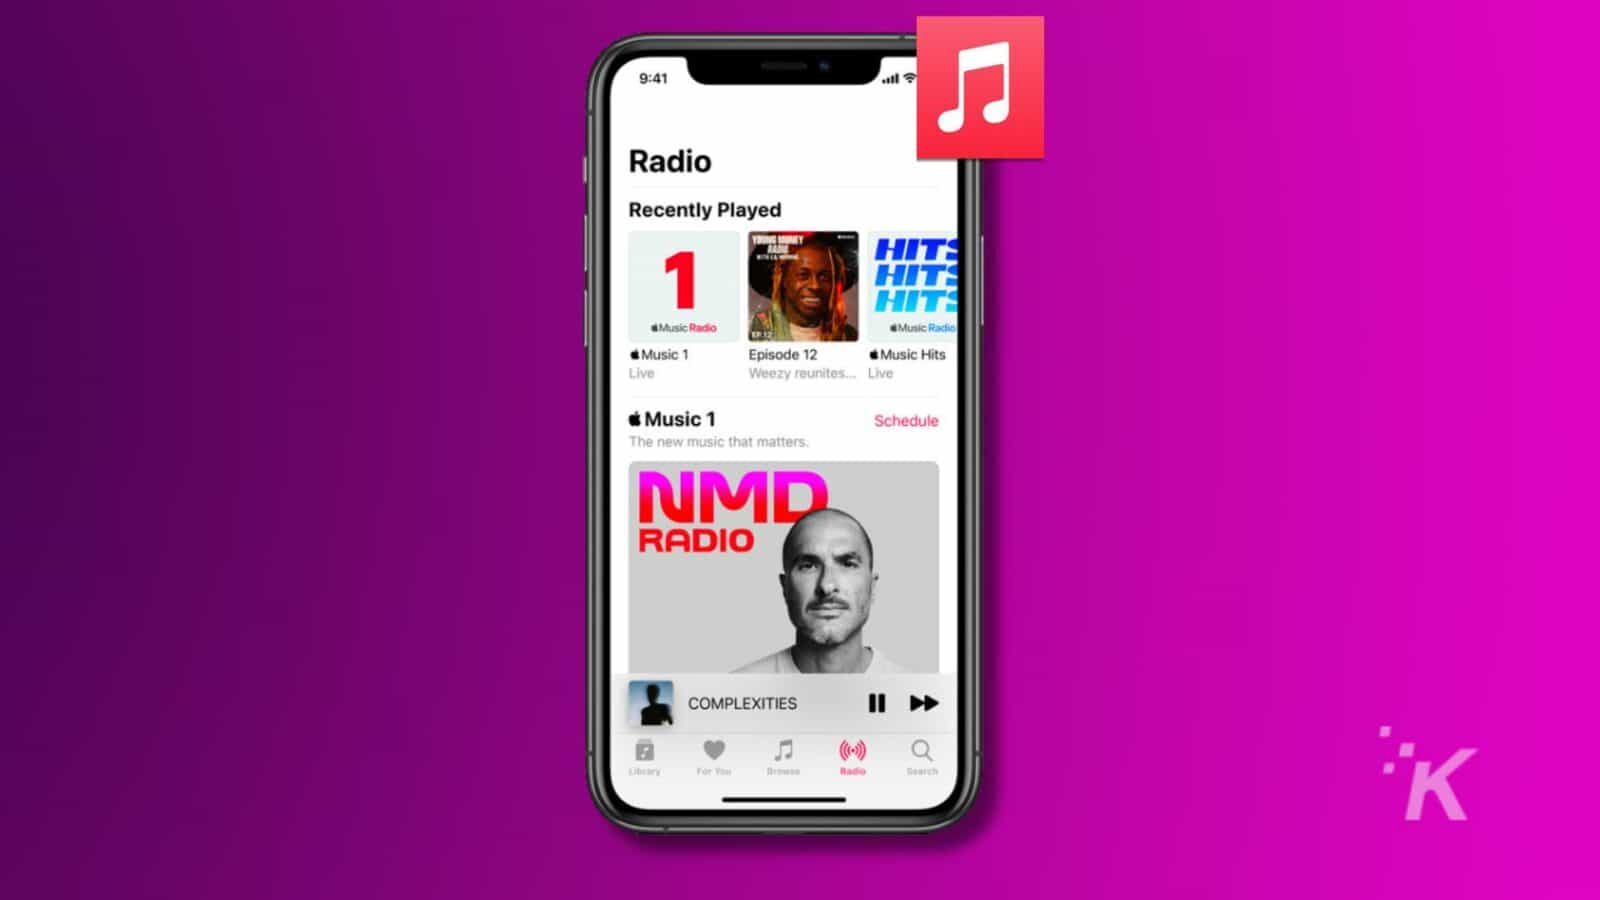 This image is showing apple music's radio station's schedule of recently played music and upcoming shows, as well as a library of music available for listeners to browse.